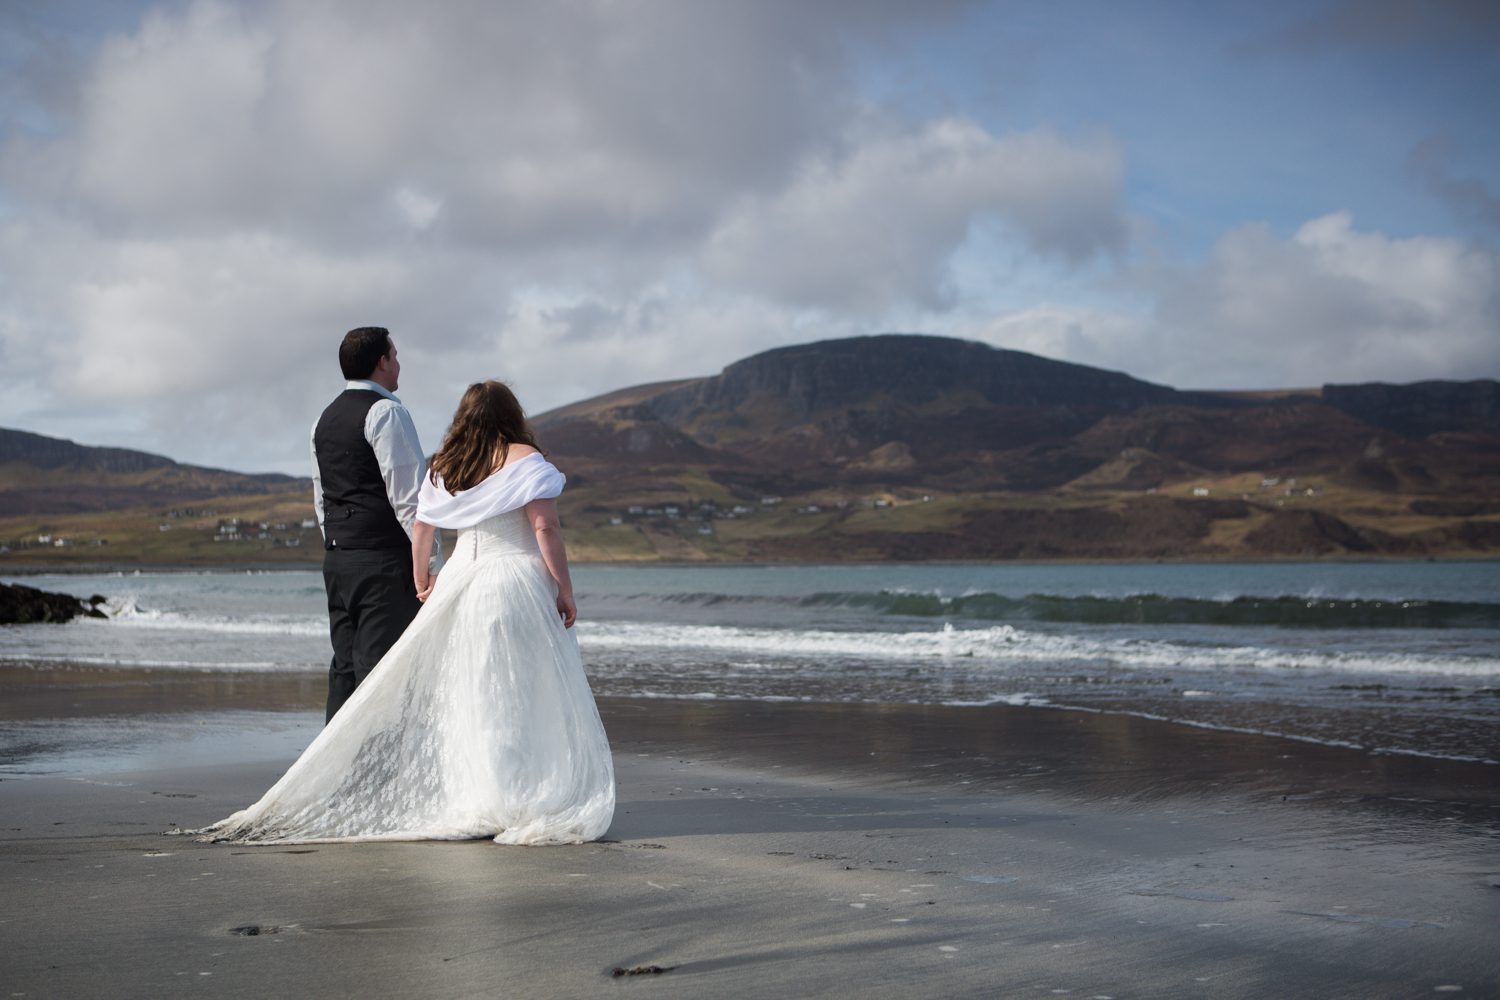 Elopement photography at Staffin beach with views to the Quiraing, Isle of Skye